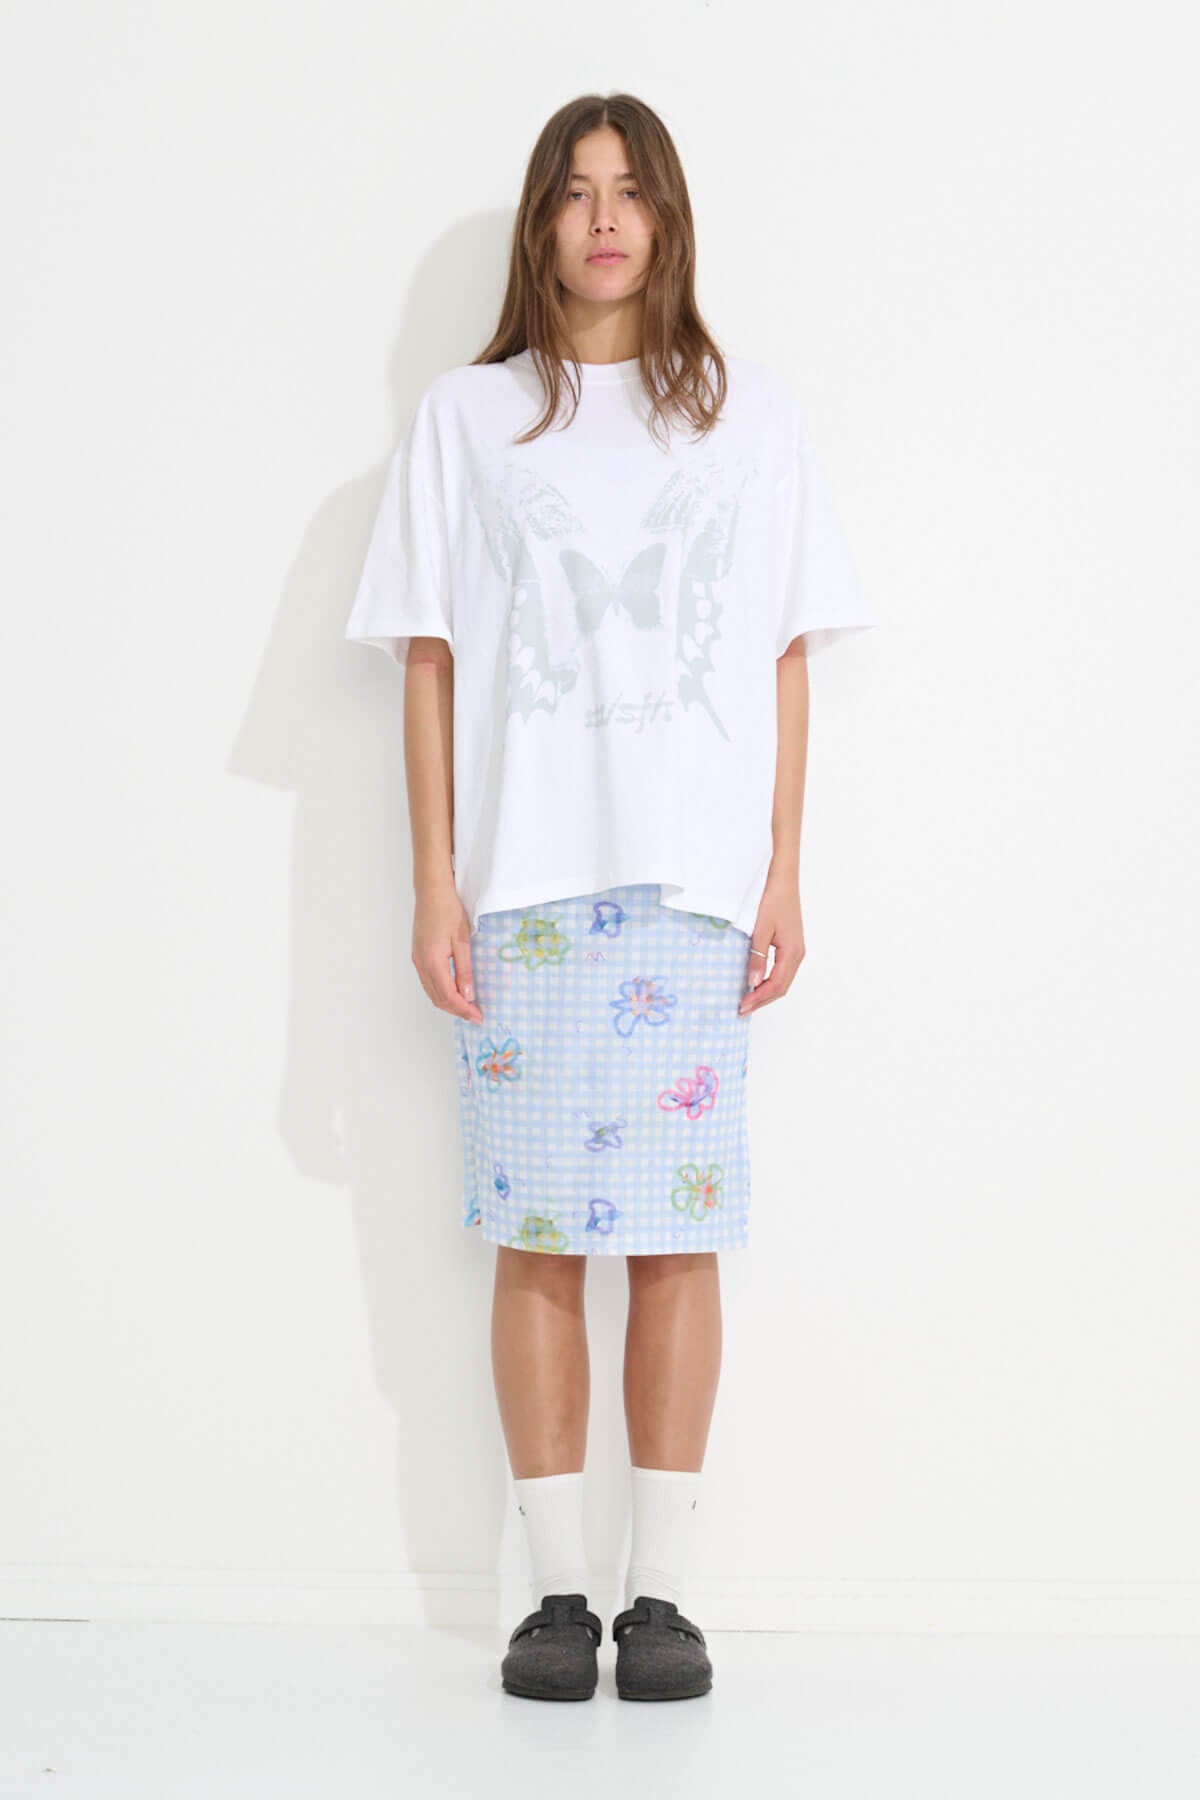 Misfit Shapes - Dream Less OS Tee - White